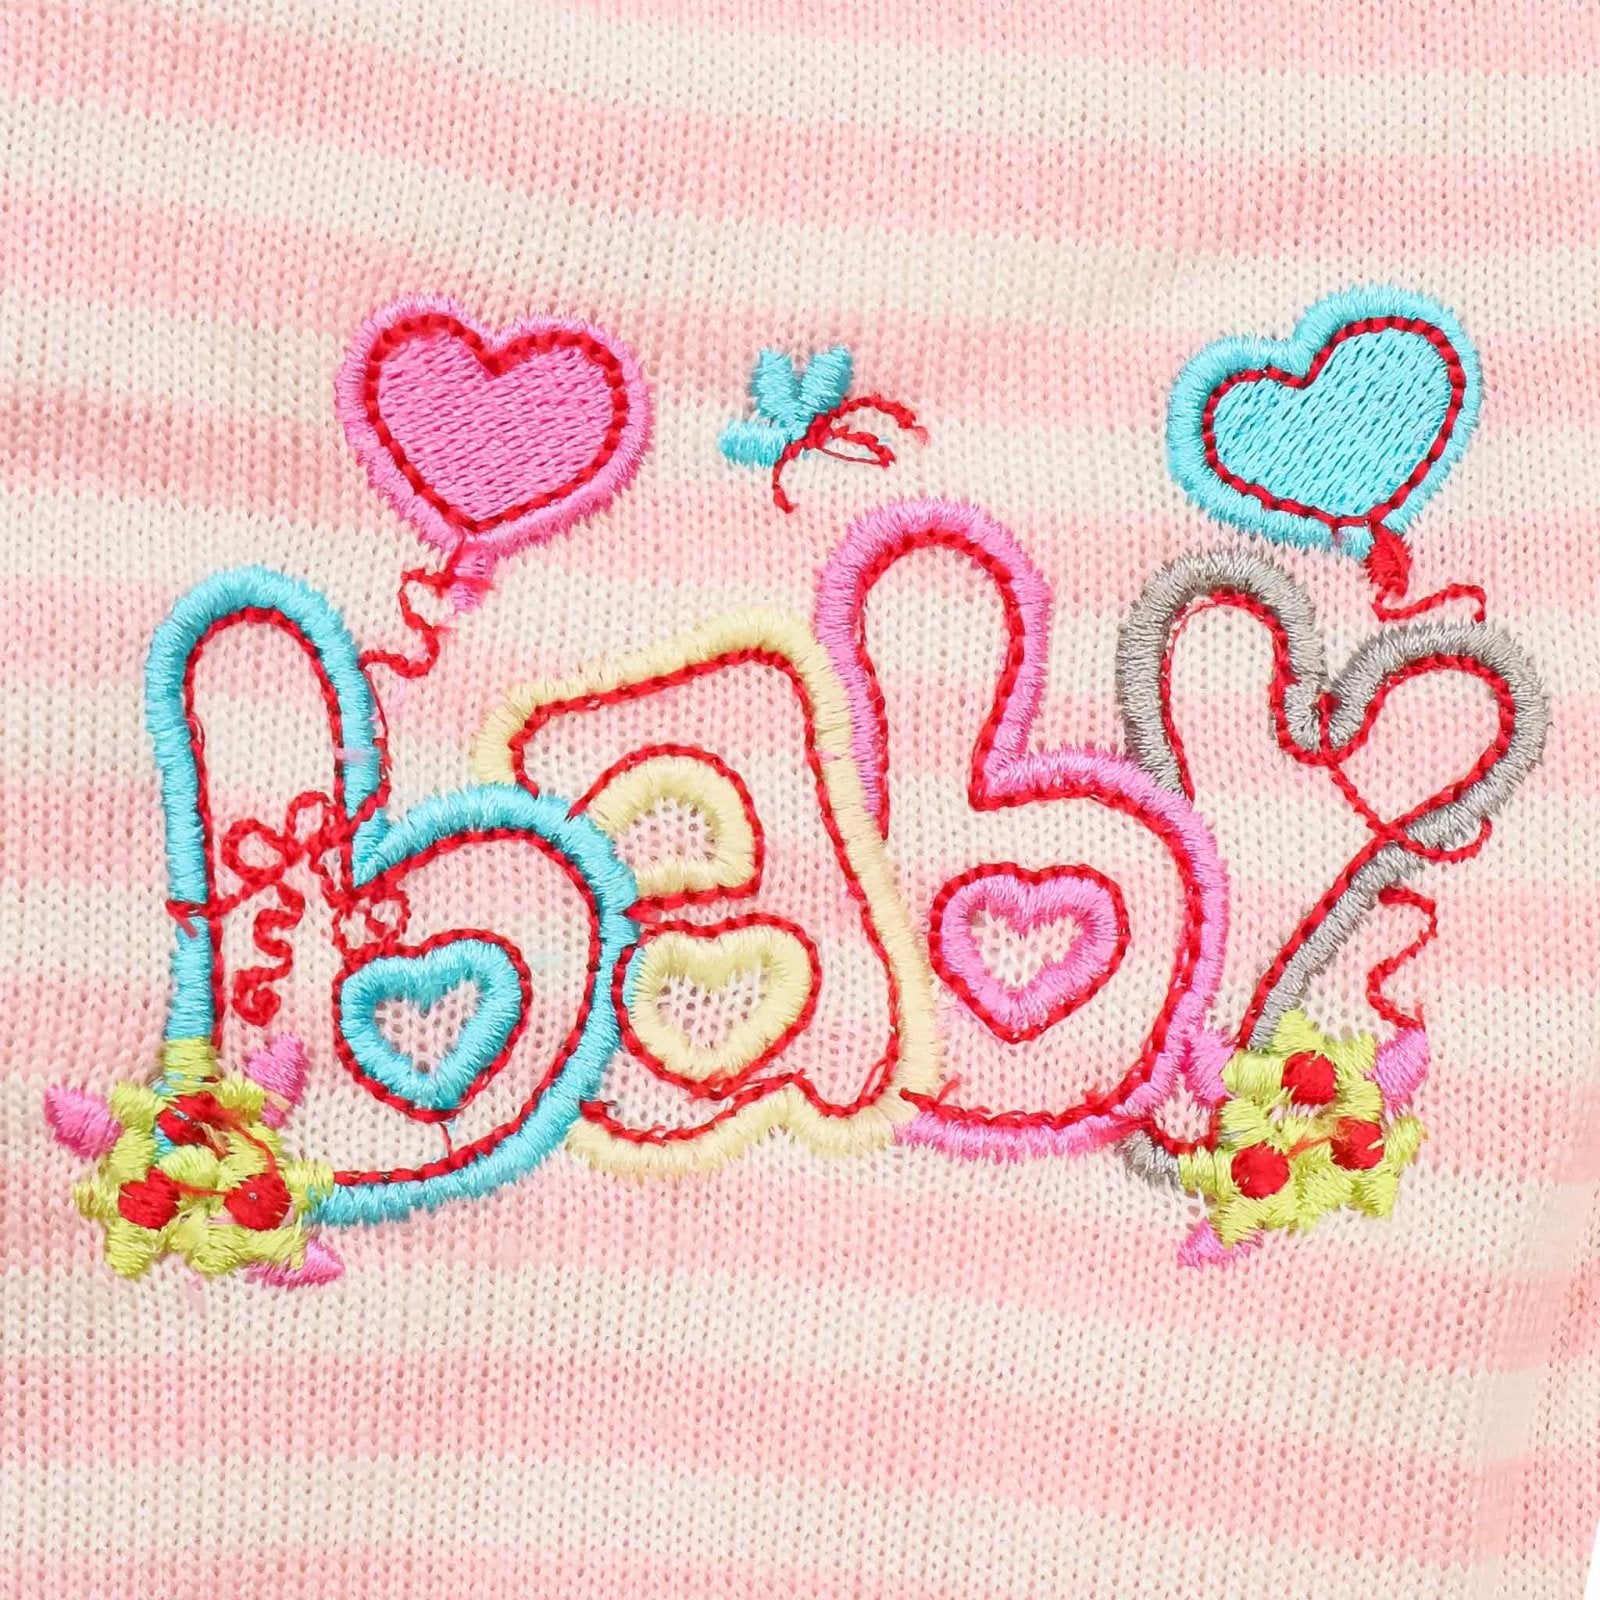 Hooded Woolen Romper Baby Embroidery Pink Stripes by Little Darling